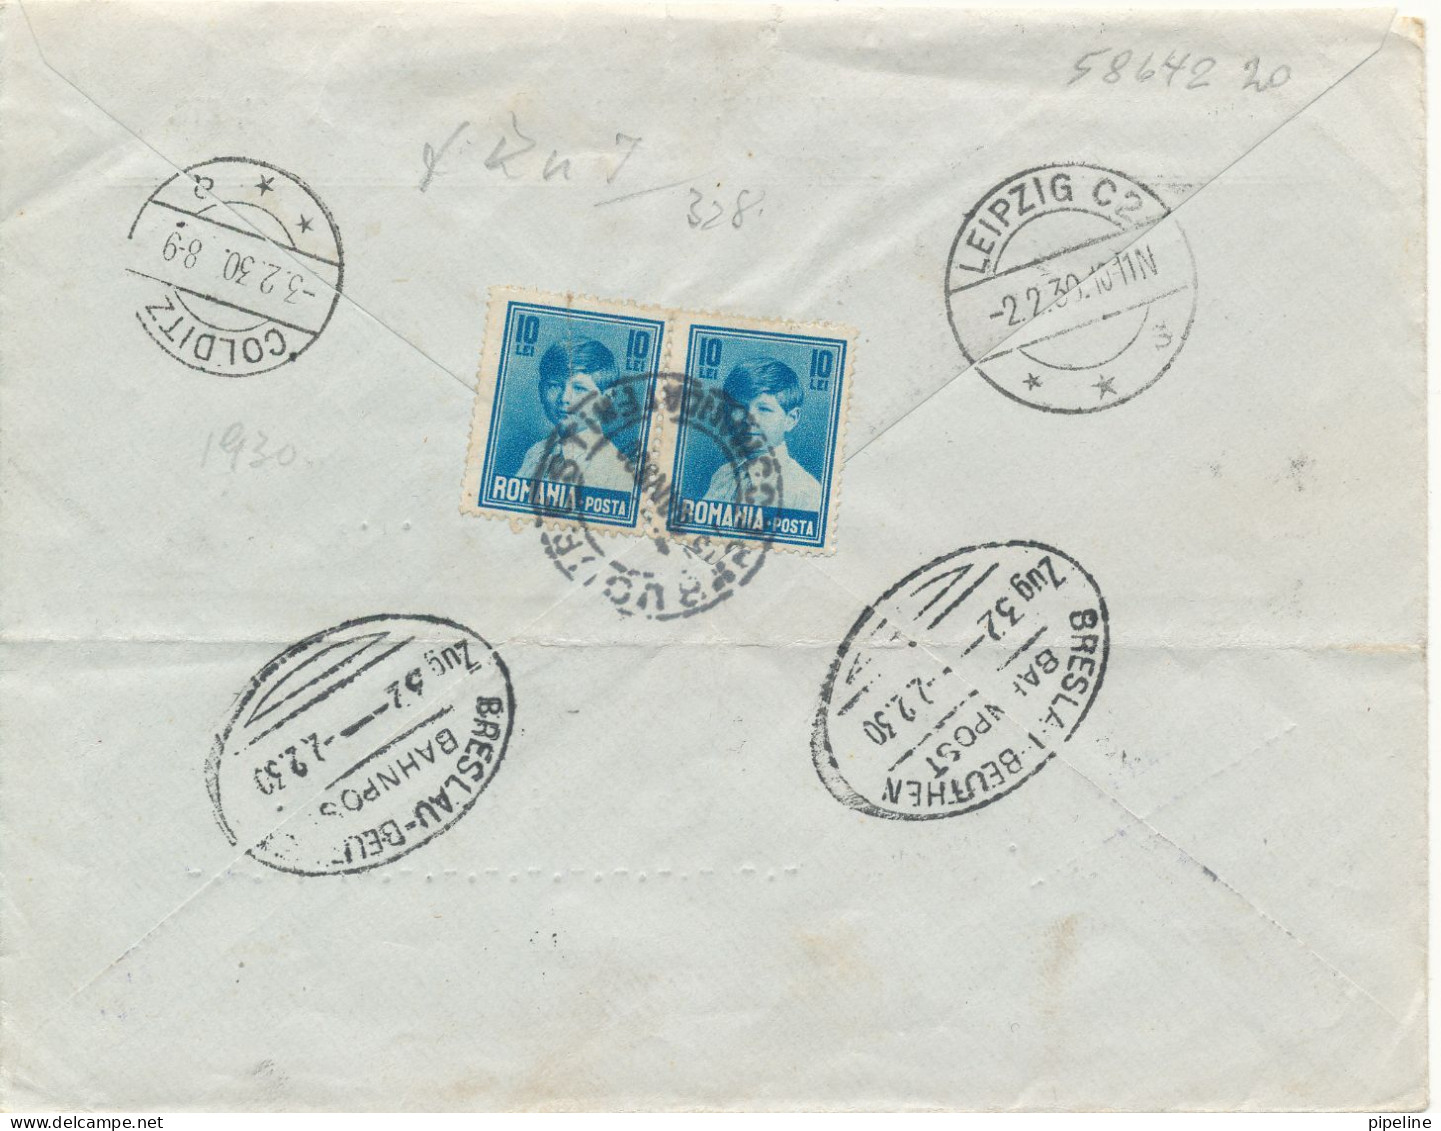 Romania Registered Cover Sent To Germany 31-1-1930 On The Backside Bahnpost Breslau - Beuthen Zug 32 2-2-1930 - Cartas & Documentos